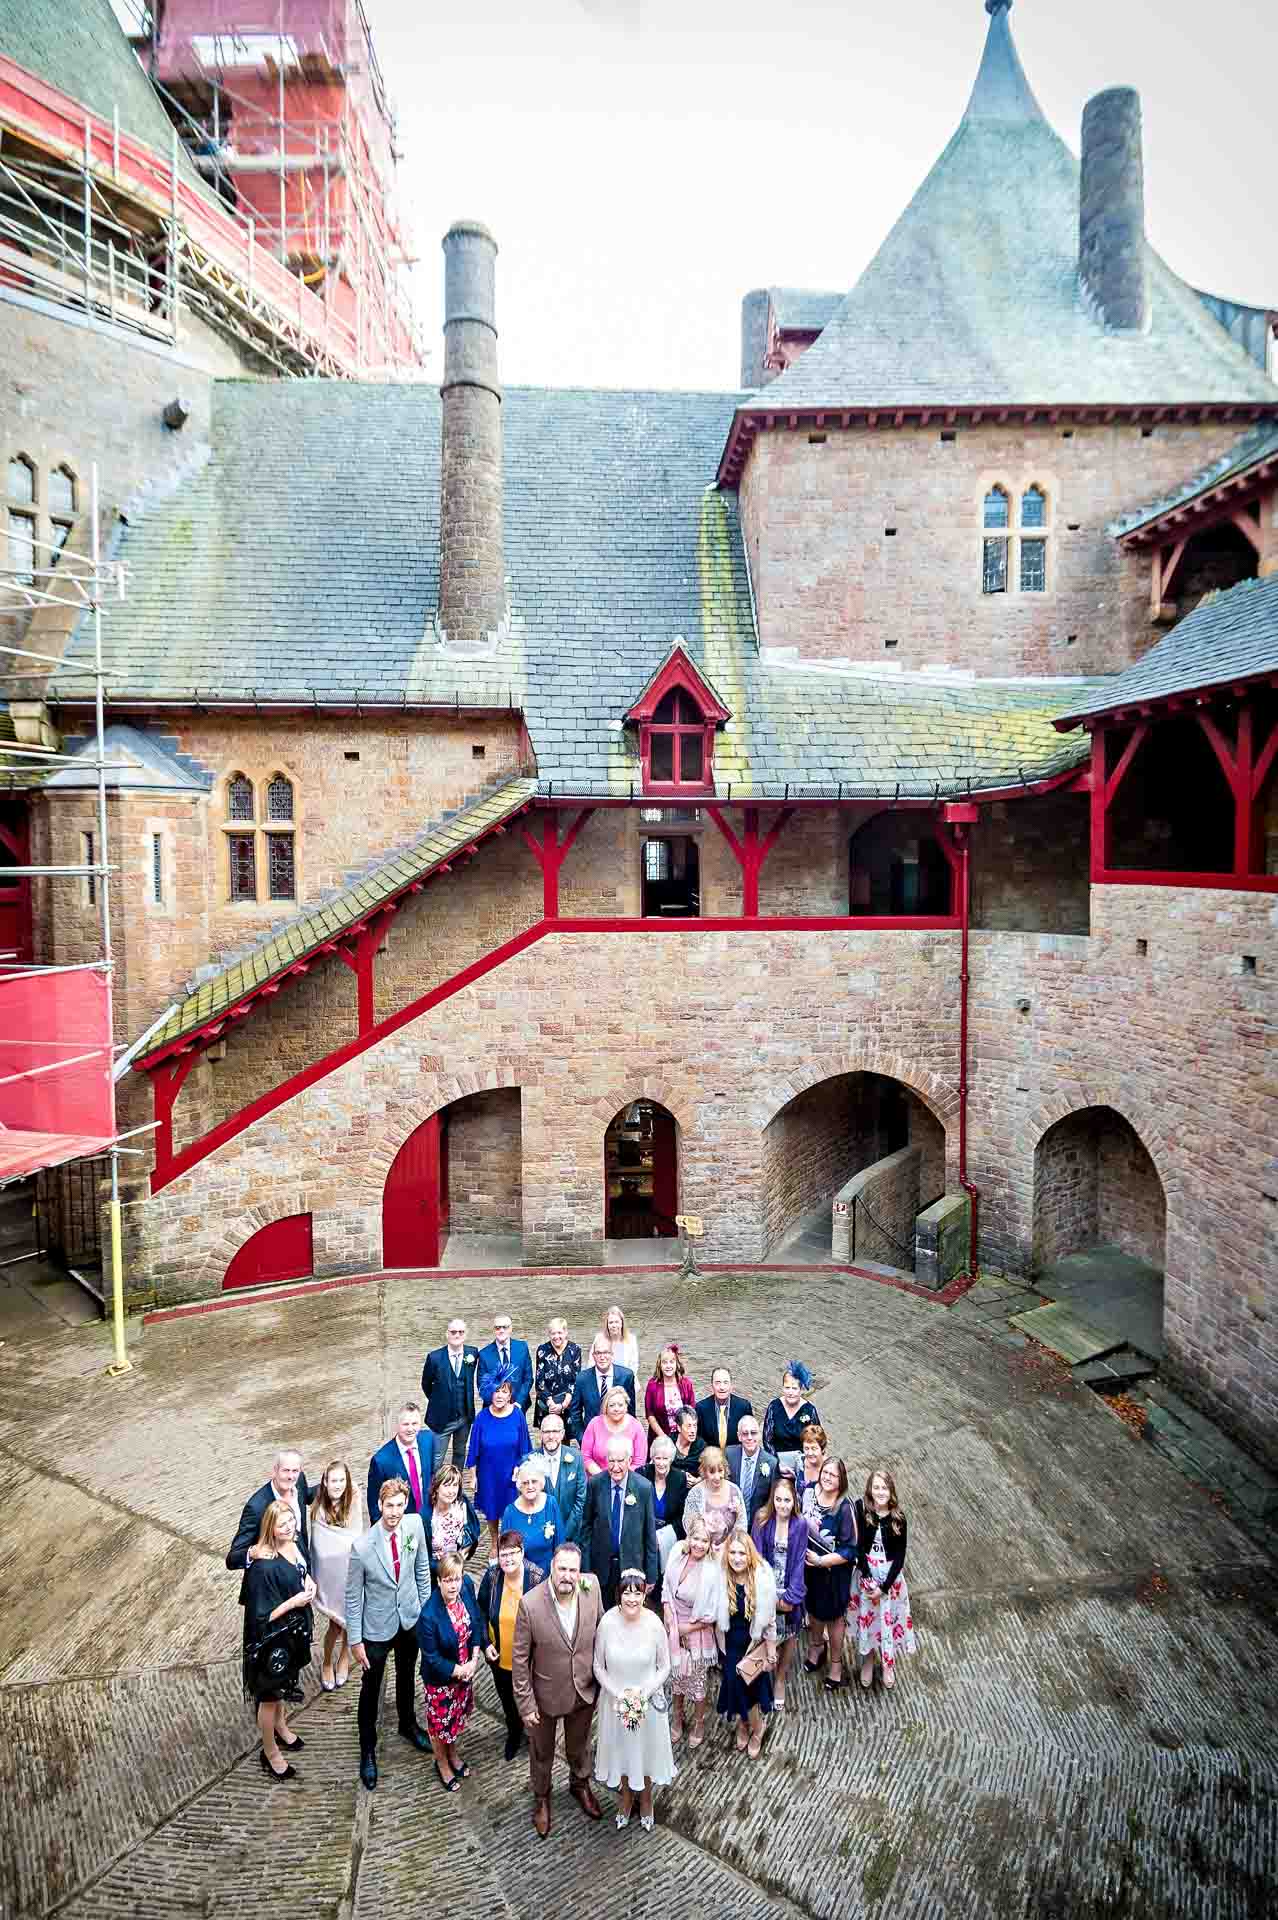 Group portrait taken of whole wedding party from above showing the architecture at Castell Coch in the background